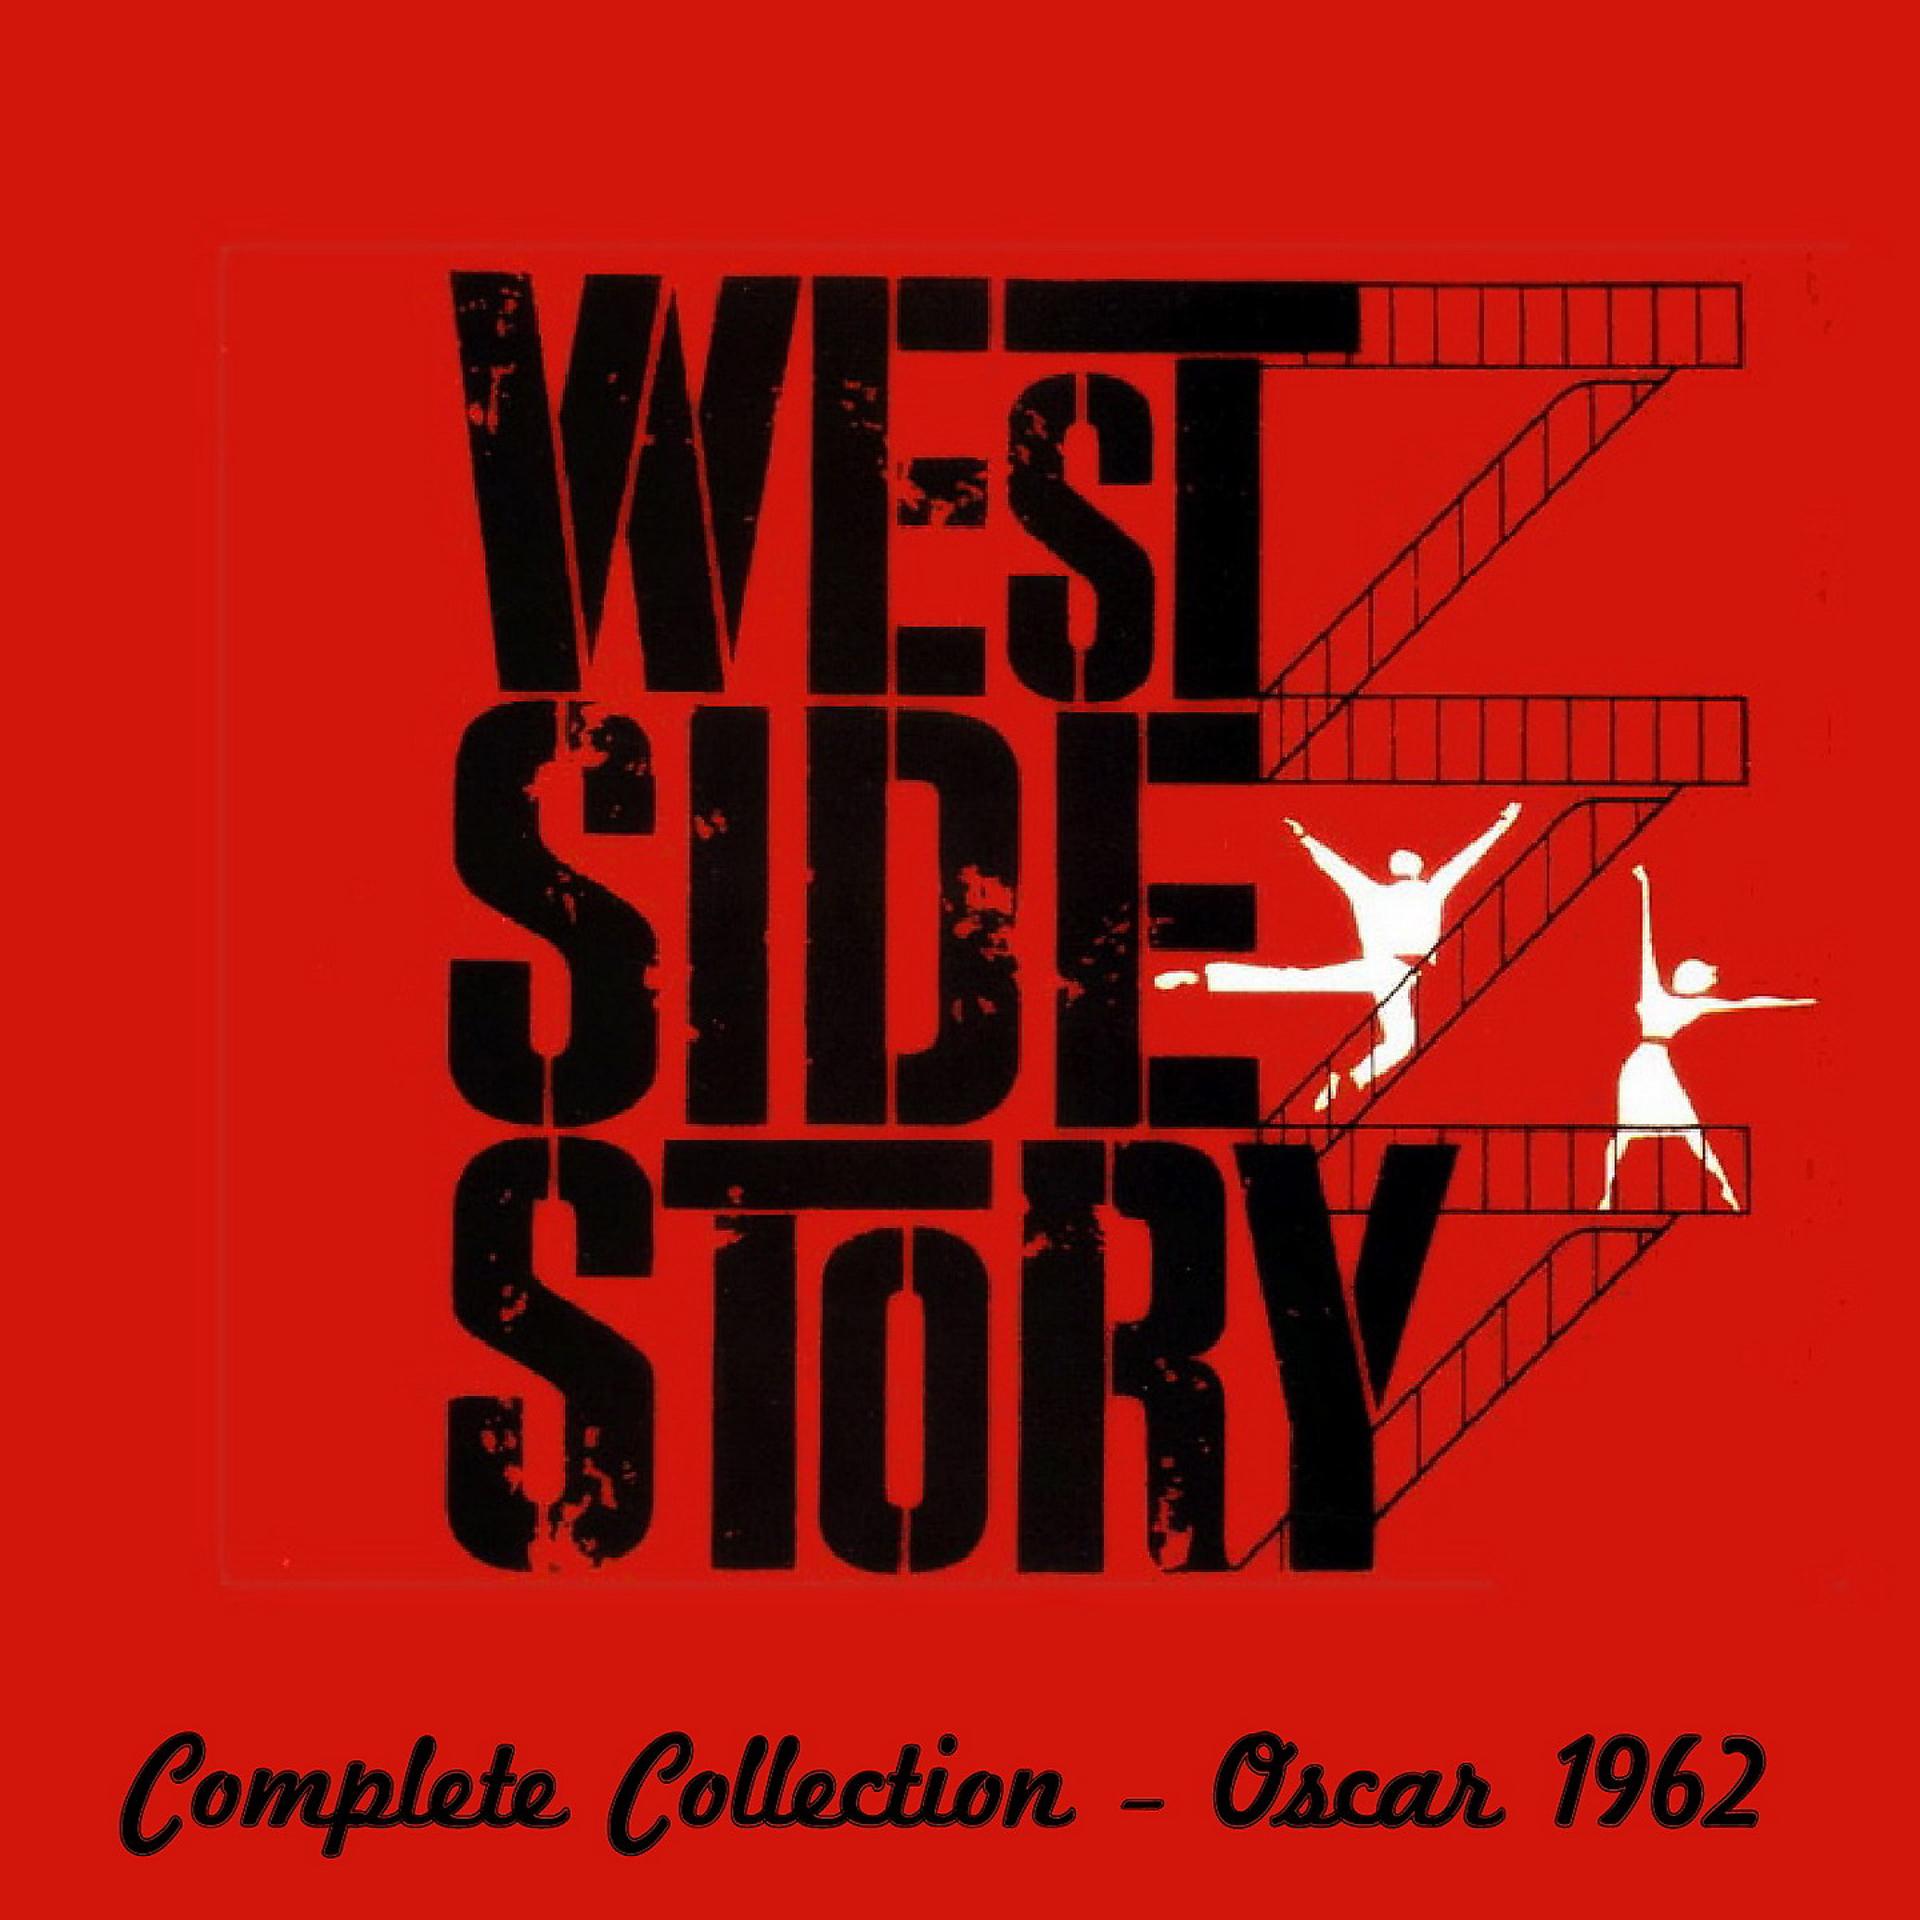 Постер альбома West Side Story Medley: Prologue / Jet Song / Something's Coming / Dance at the Gym / Maria / Balcony Scene / America / One Hand, One Heart / Tonight Quintet and Chorus / The Rumble / I Feel Pretty / Somewhere / Gee Officer Krupke! / A Boy Like That / Fin